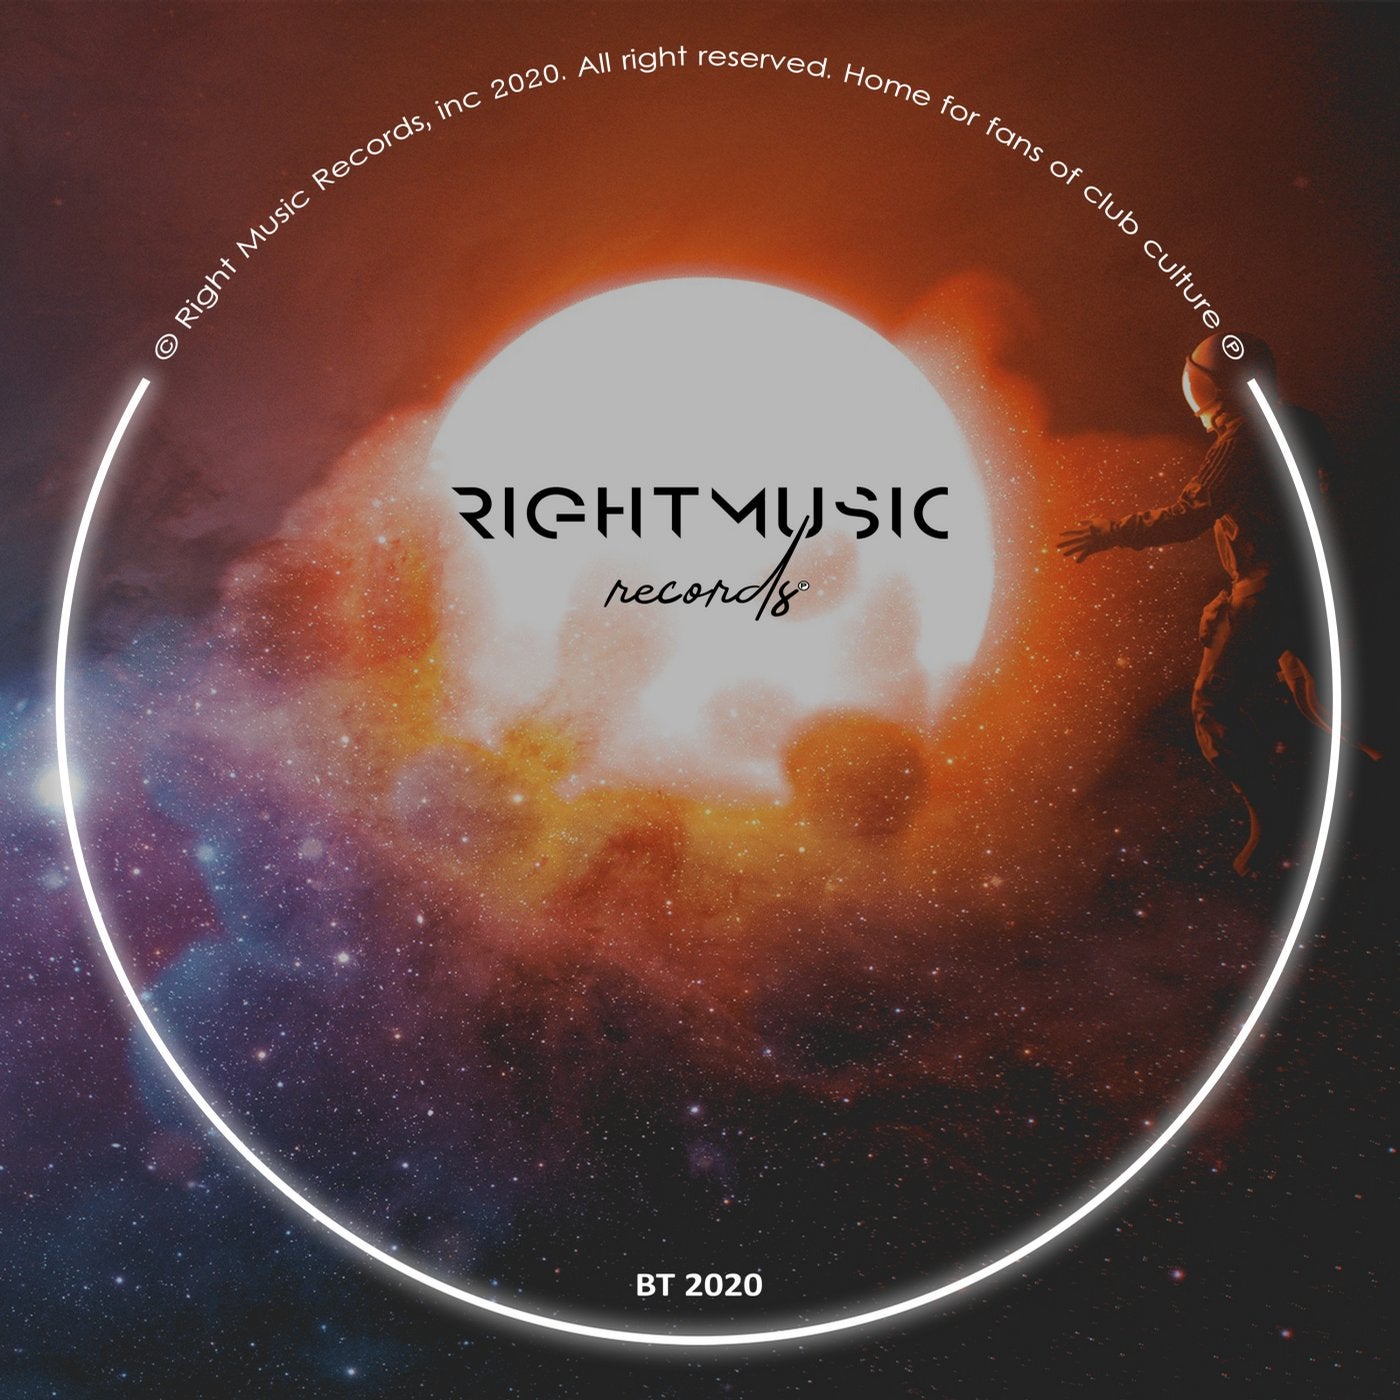 The Best Tracks on Right Music Records in 2020 Year.